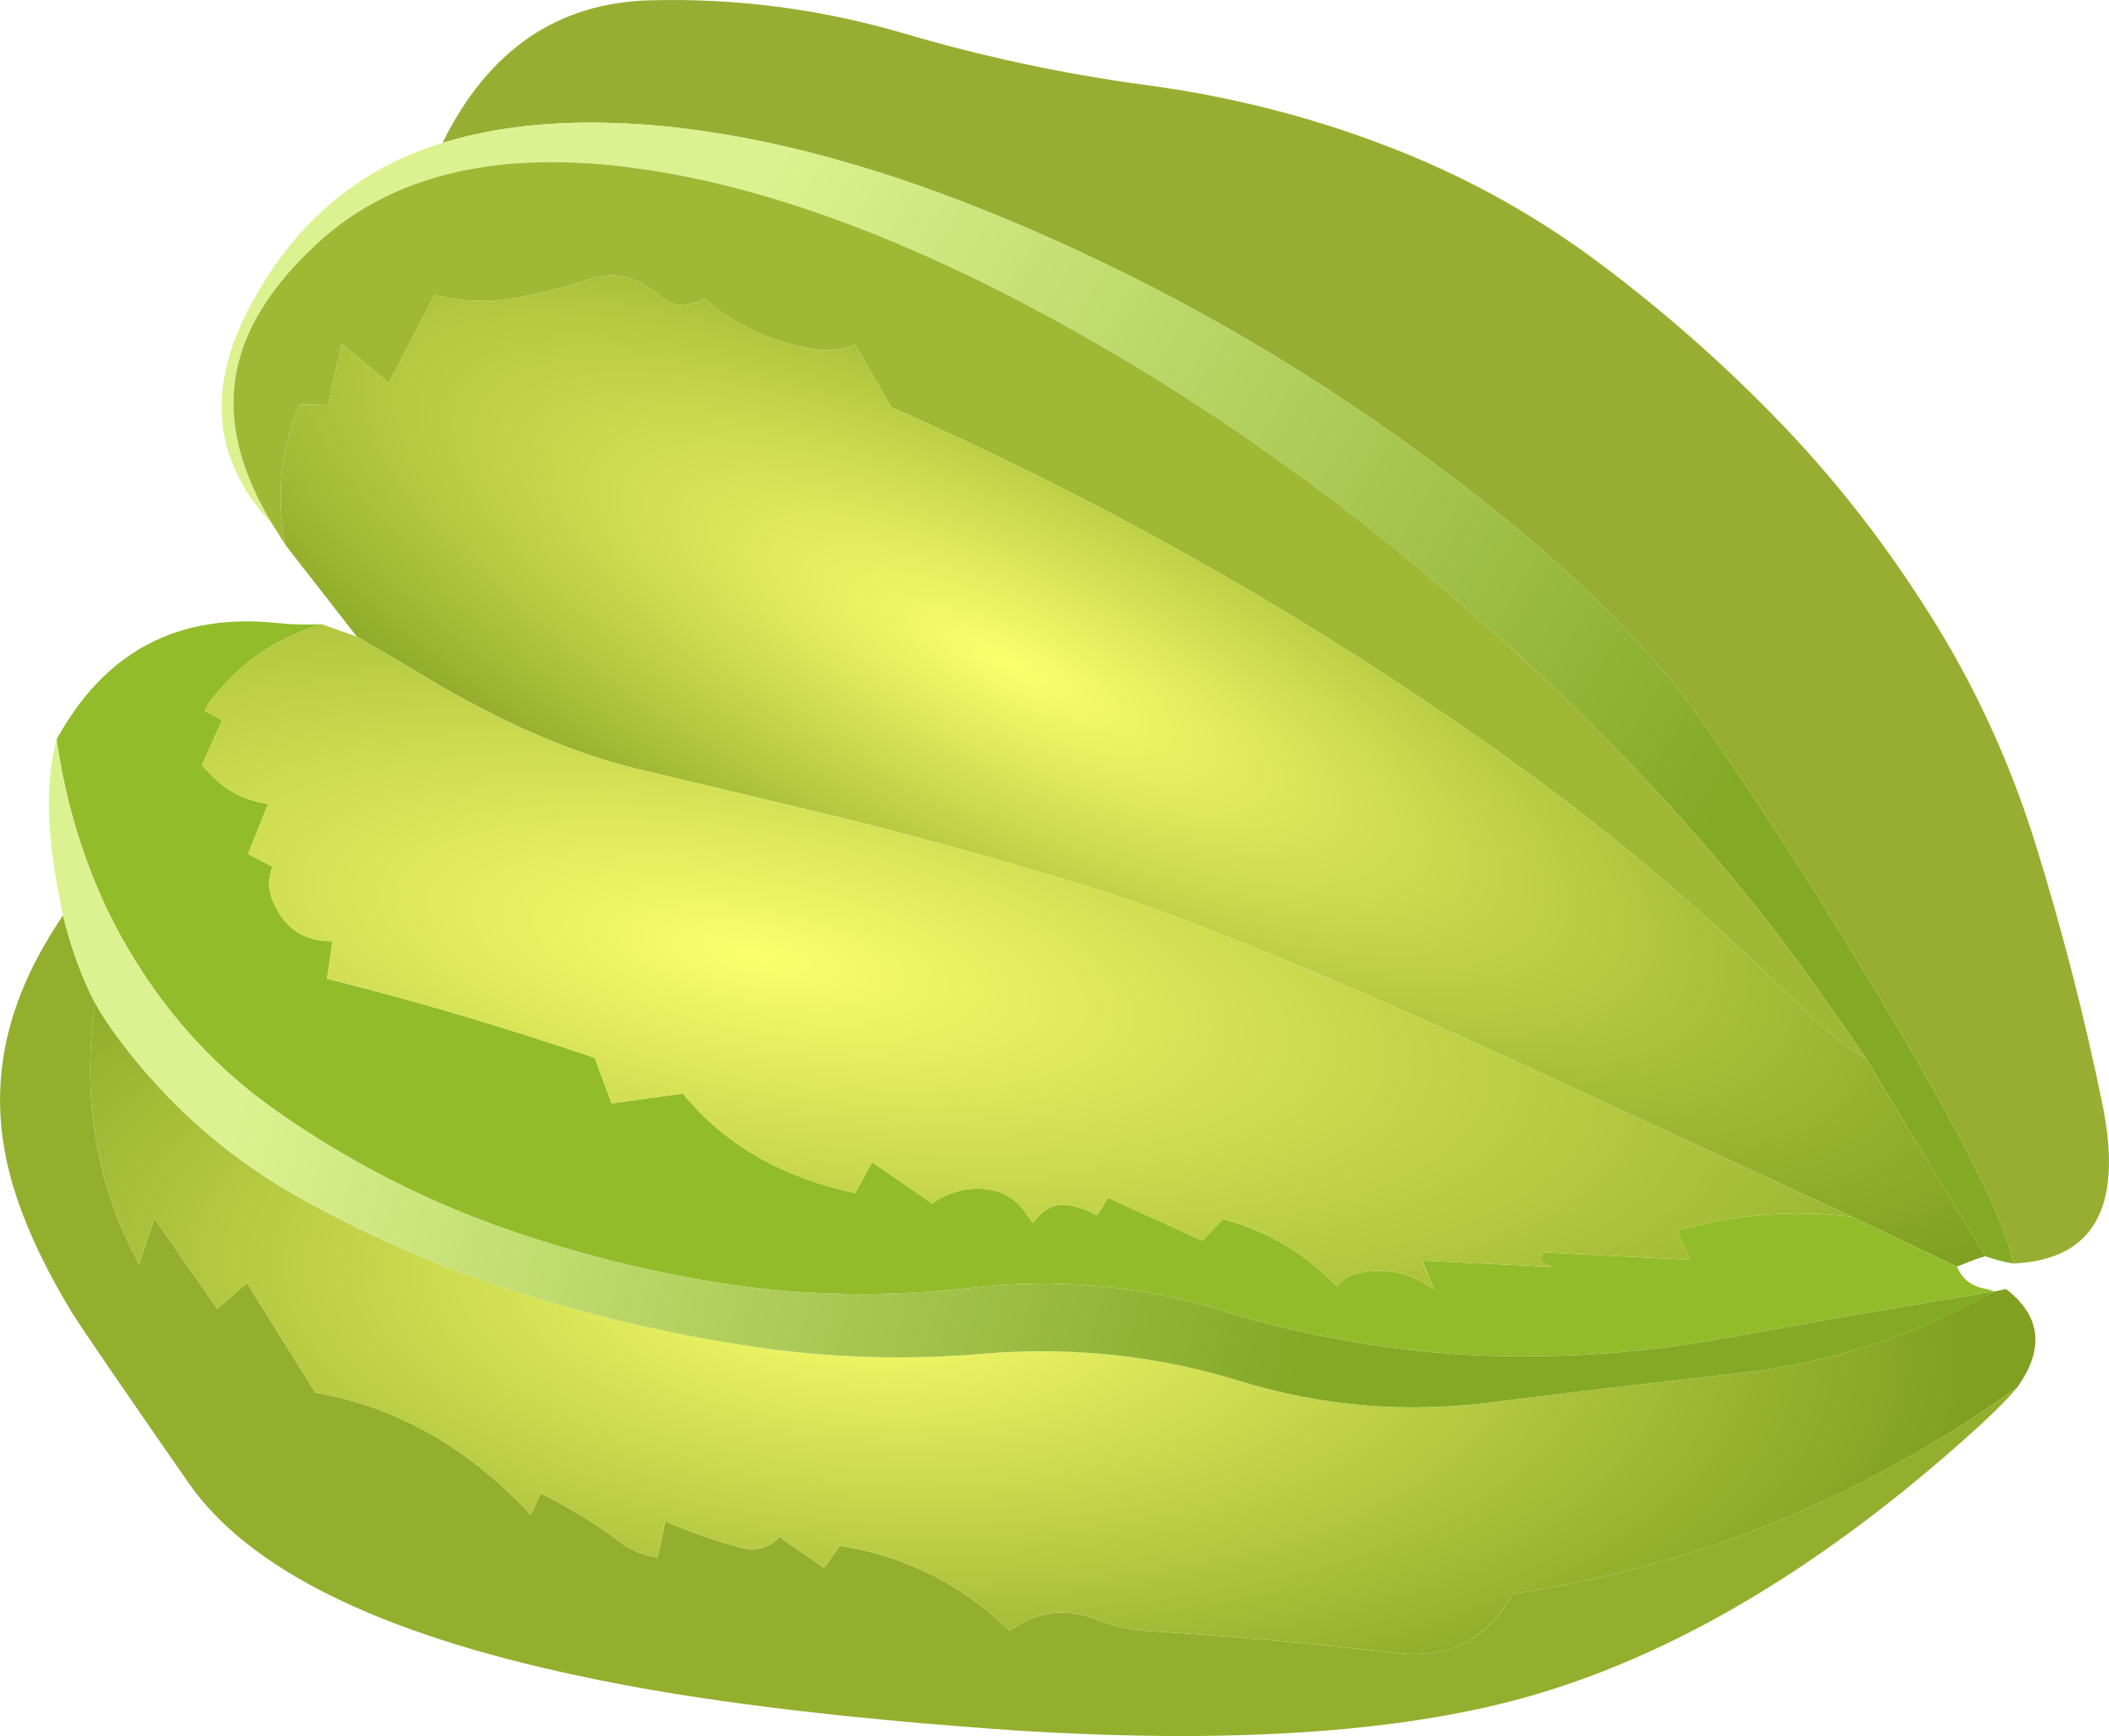 growth clipart vegetable